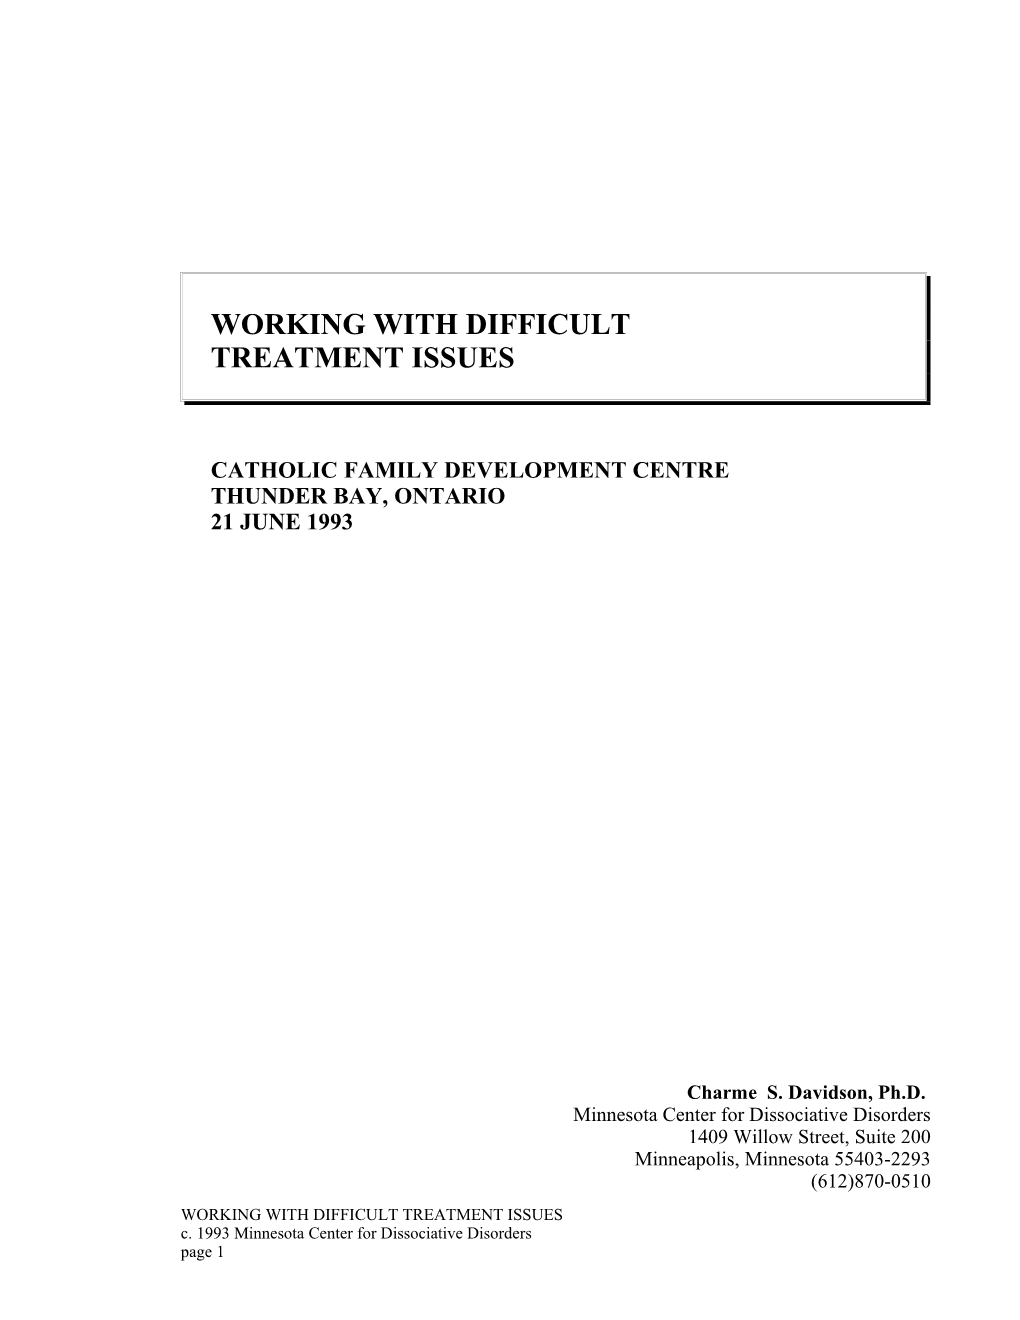 Working with Difficult